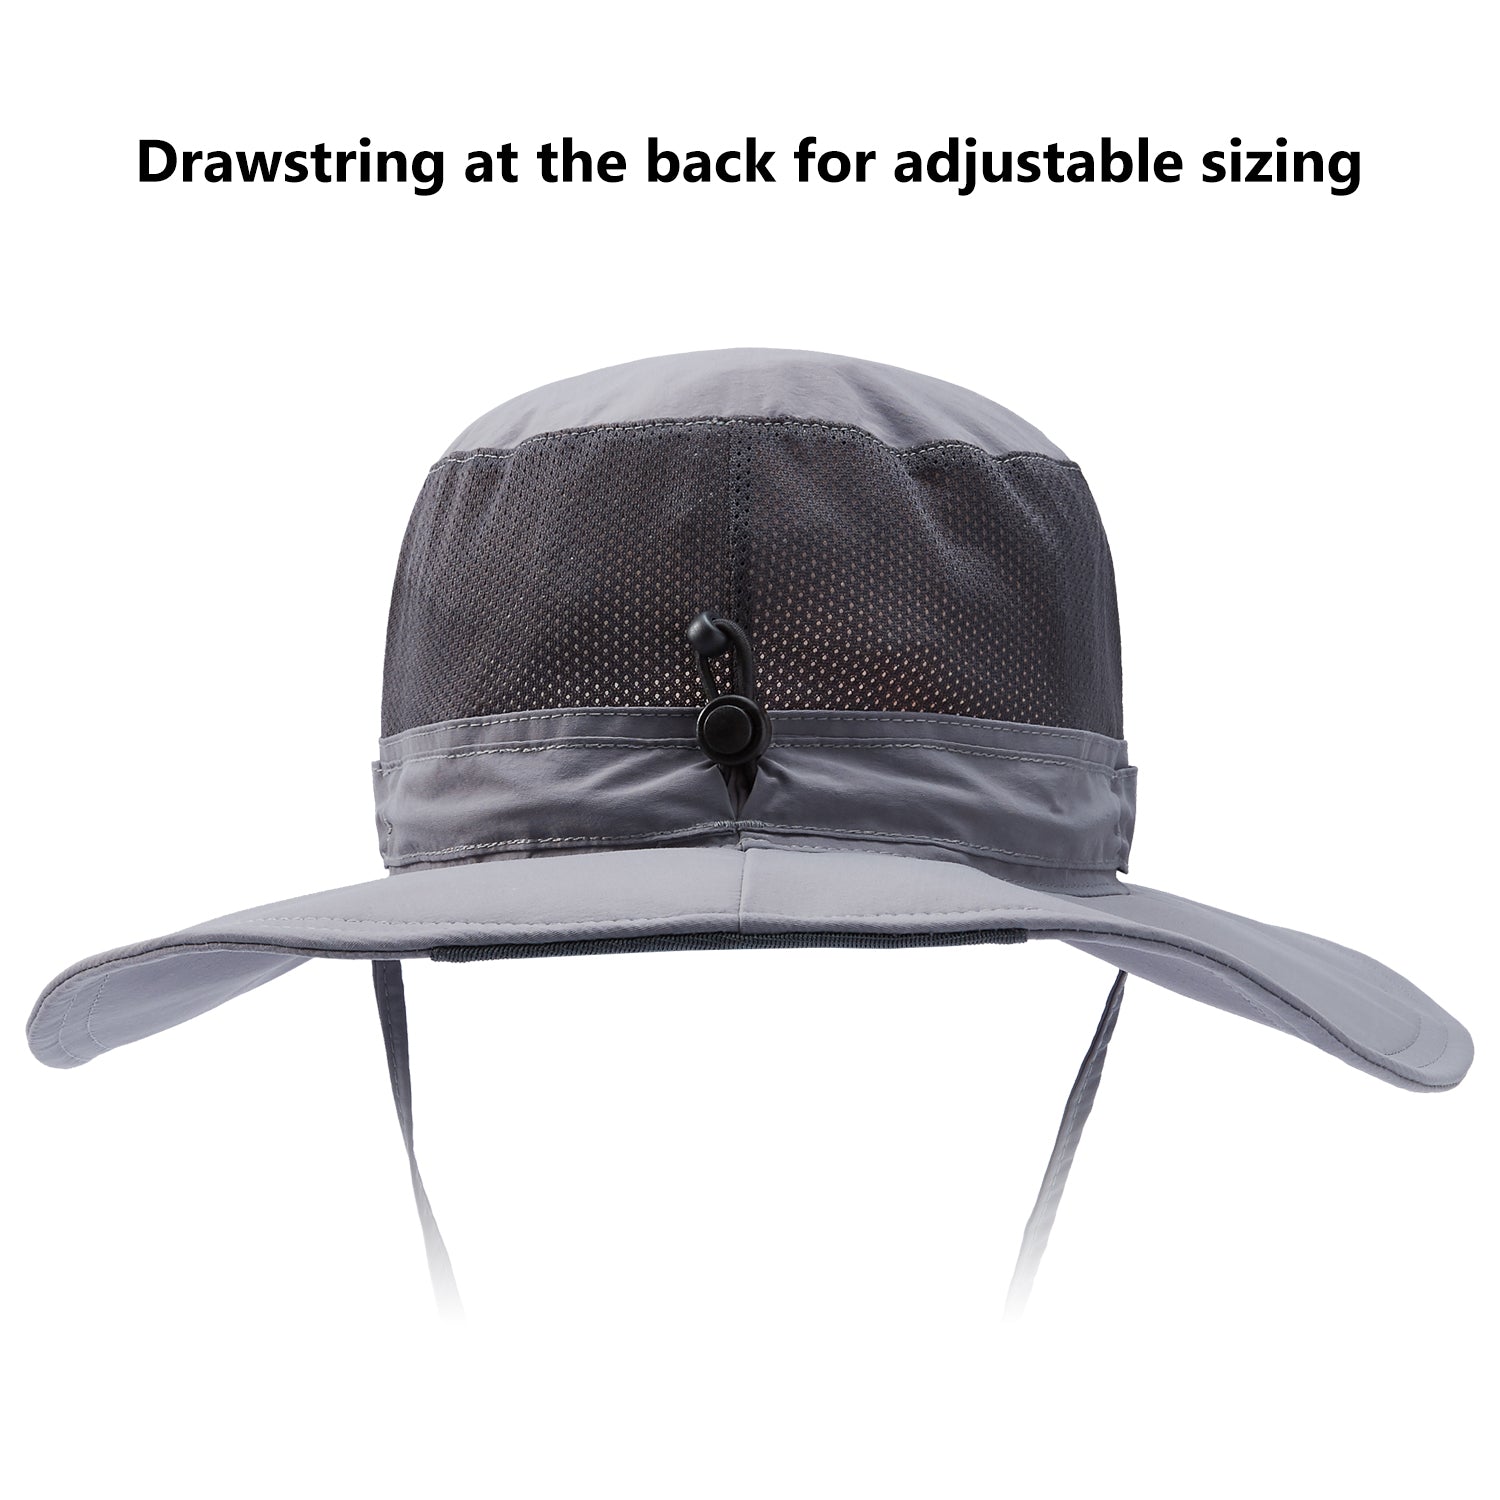 unisex Hats - Autumn Sun Hat for Men & Women - Bucket Hat with Neck Flap - Outdoor UV Protection with Large Wide Brim Dark Grey